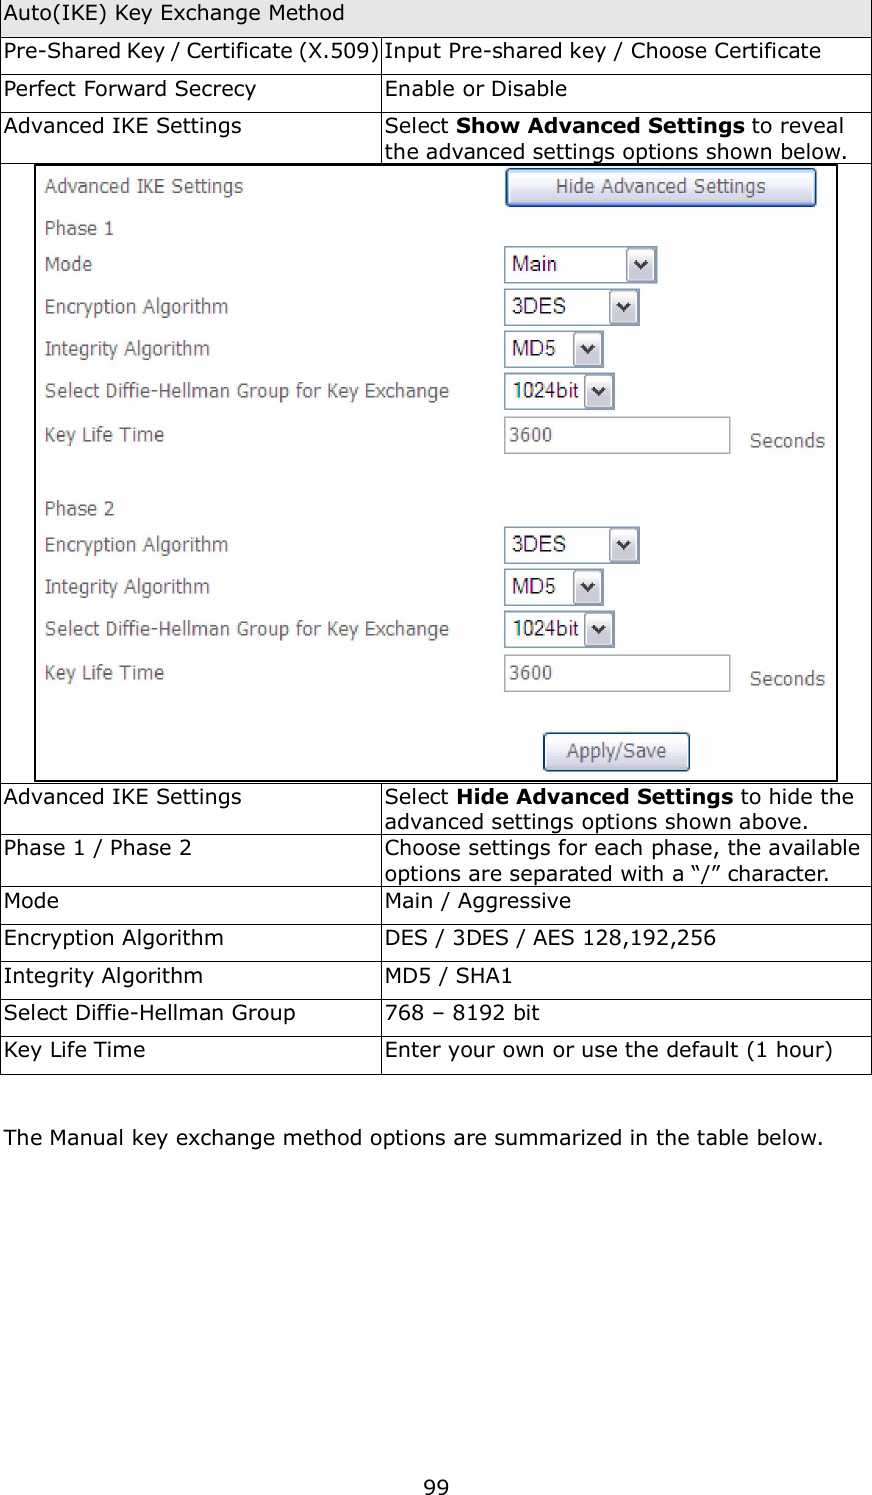  99 Auto(IKE) Key Exchange Method Pre-Shared Key / Certificate (X.509) Input Pre-shared key / Choose Certificate Perfect Forward Secrecy  Enable or Disable   Advanced IKE Settings  Select Show Advanced Settings to reveal the advanced settings options shown below.   Advanced IKE Settings  Select Hide Advanced Settings to hide the advanced settings options shown above.   Phase 1 / Phase 2  Choose settings for each phase, the available options are separated with a “/” character.   Mode  Main / Aggressive Encryption Algorithm  DES / 3DES / AES 128,192,256 Integrity Algorithm  MD5 / SHA1 Select Diffie-Hellman Group  768 – 8192 bit Key Life Time  Enter your own or use the default (1 hour)   The Manual key exchange method options are summarized in the table below.            